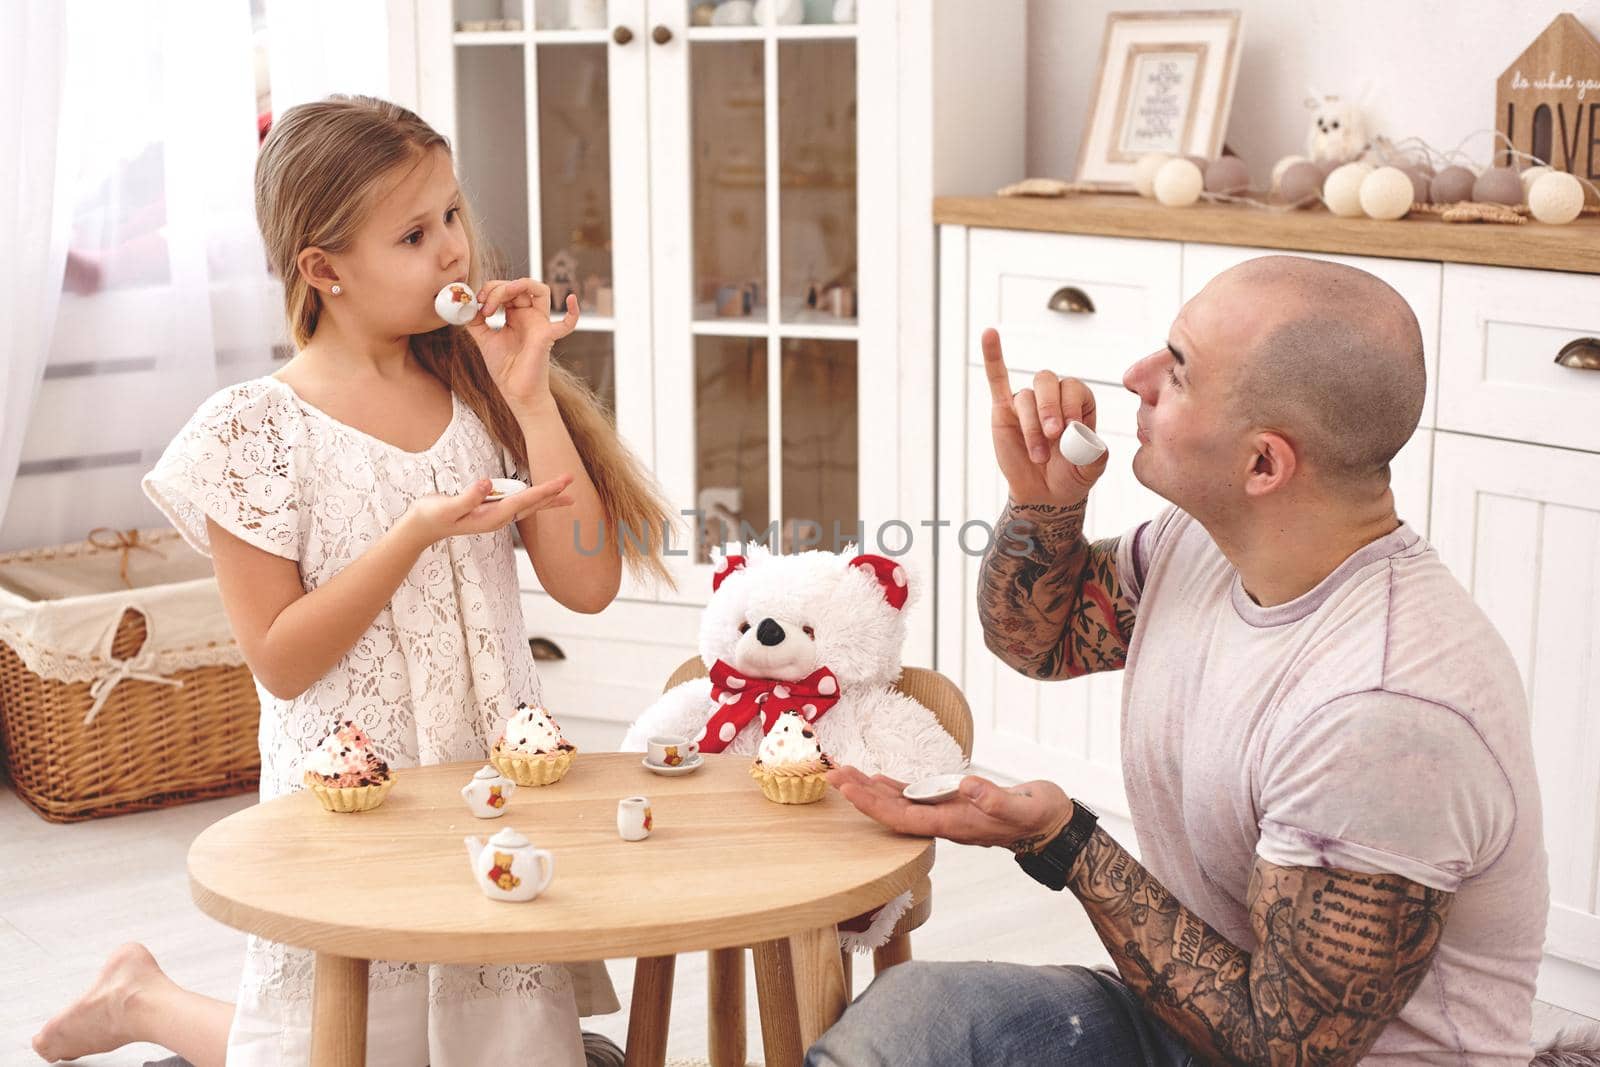 White modern kid's room whith a wooden furniture. Adorable daughter whith a long blond hair wearing a white dress. They are drinking tea with cupcackes from a toy dishes in a modern kid's room whith a wooden furniture. Daddy with tattoos is looking at his daughter and she is looking at him also. Friendly family spending their free time together sitting on a pillows.